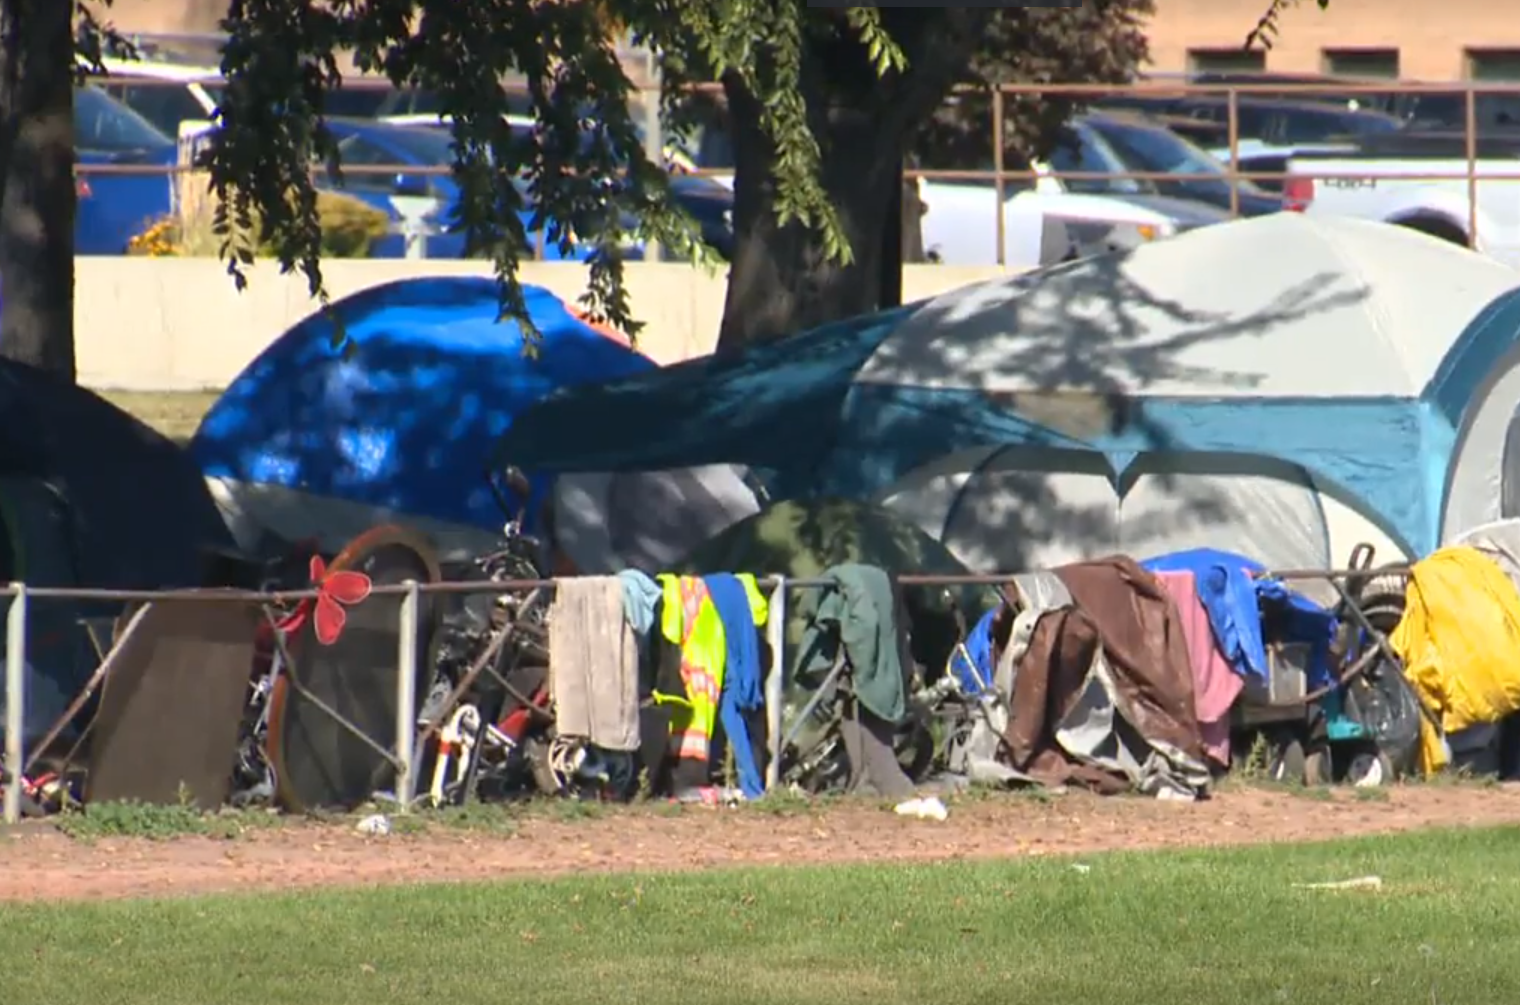 Lethbridge shelter to receive $1M to fund temporary winter spaces